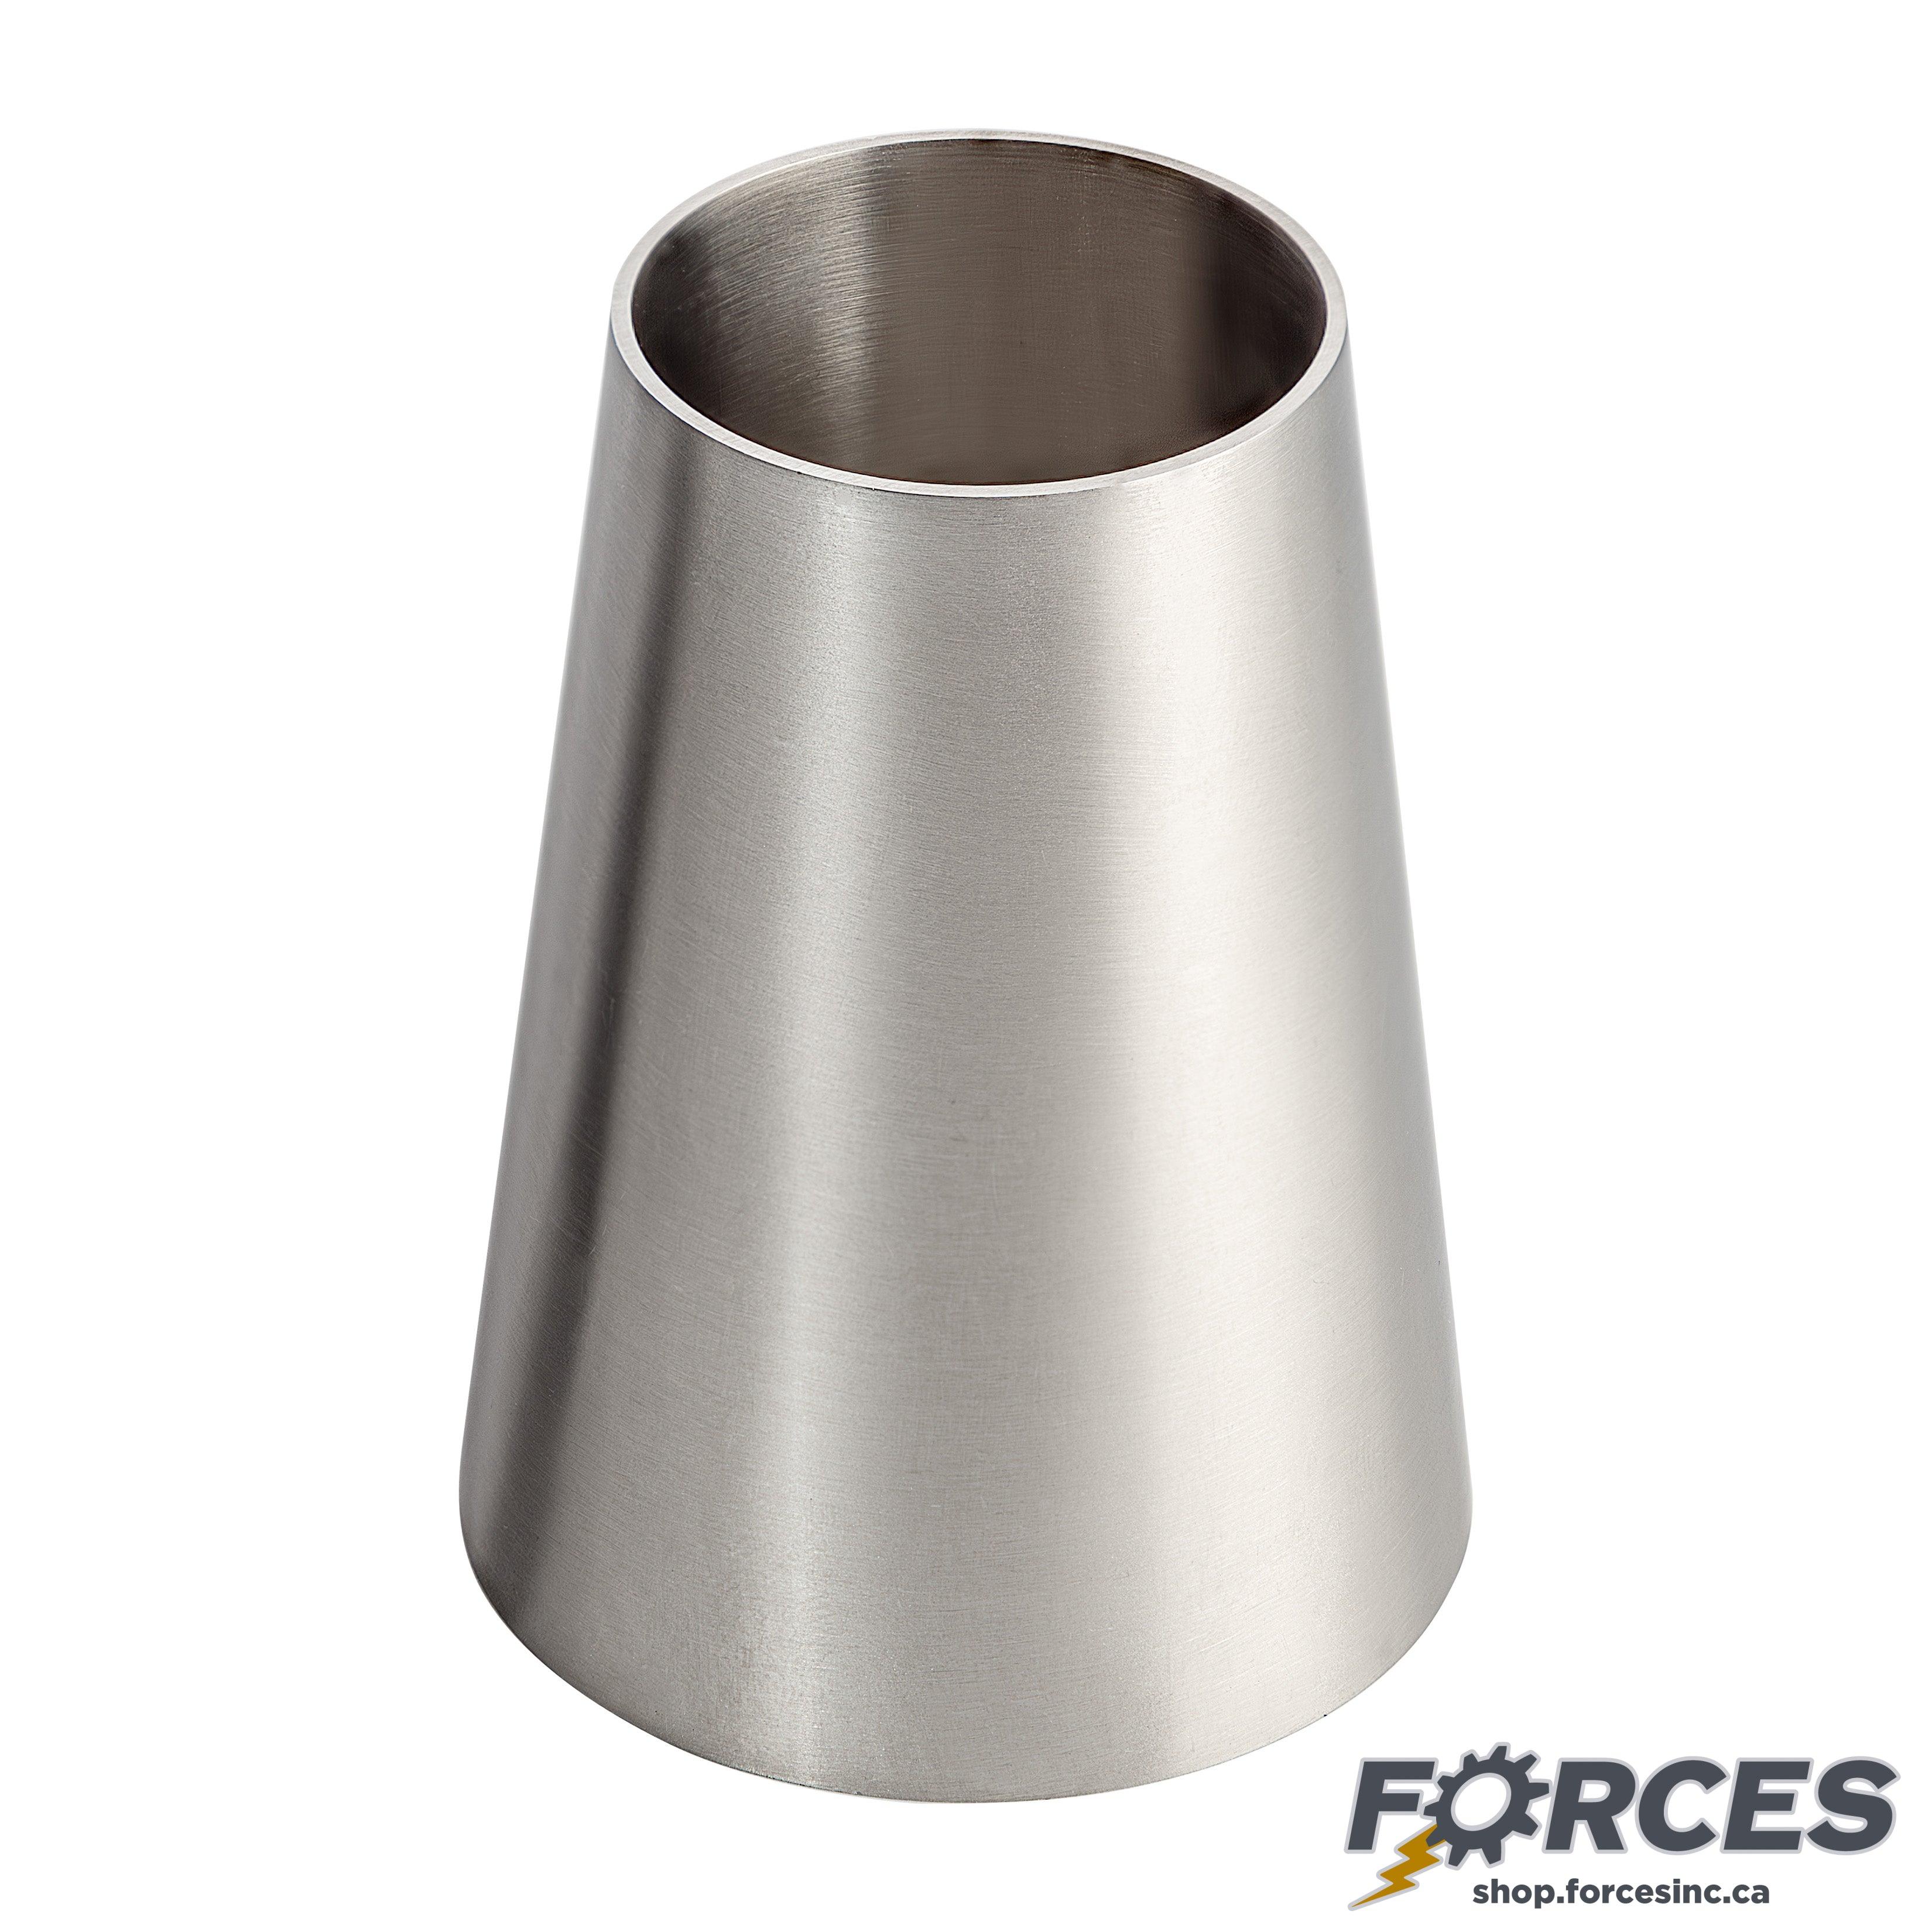 4" x 1/2" x 14" Long Butt Weld Concentric Reducer - Stainless Steel 316 - Forces Inc